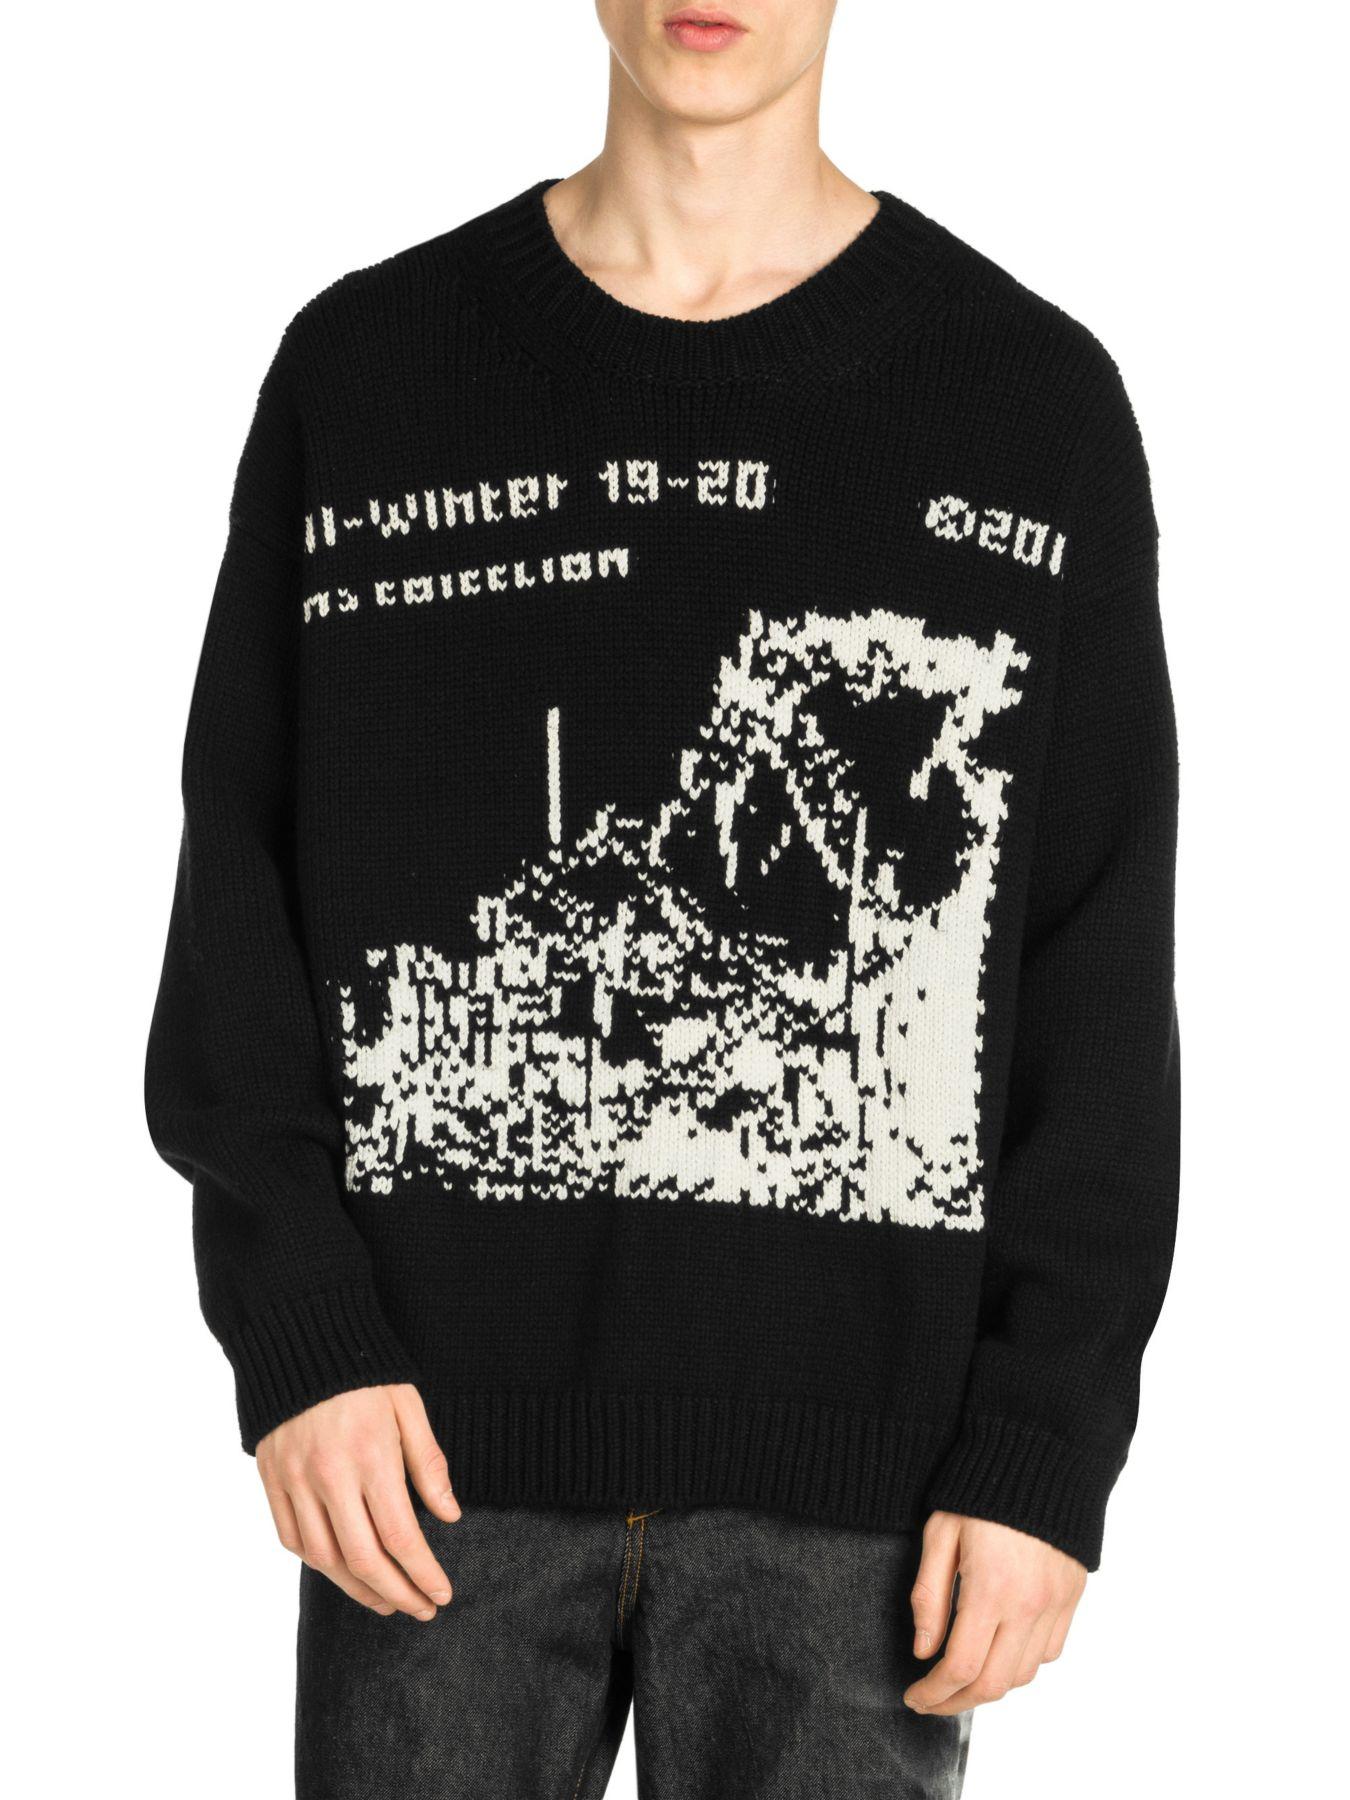 Off-White c/o Virgil Abloh Wool Ruined Factory Knit Sweater in Black White  (Black) for Men - Lyst